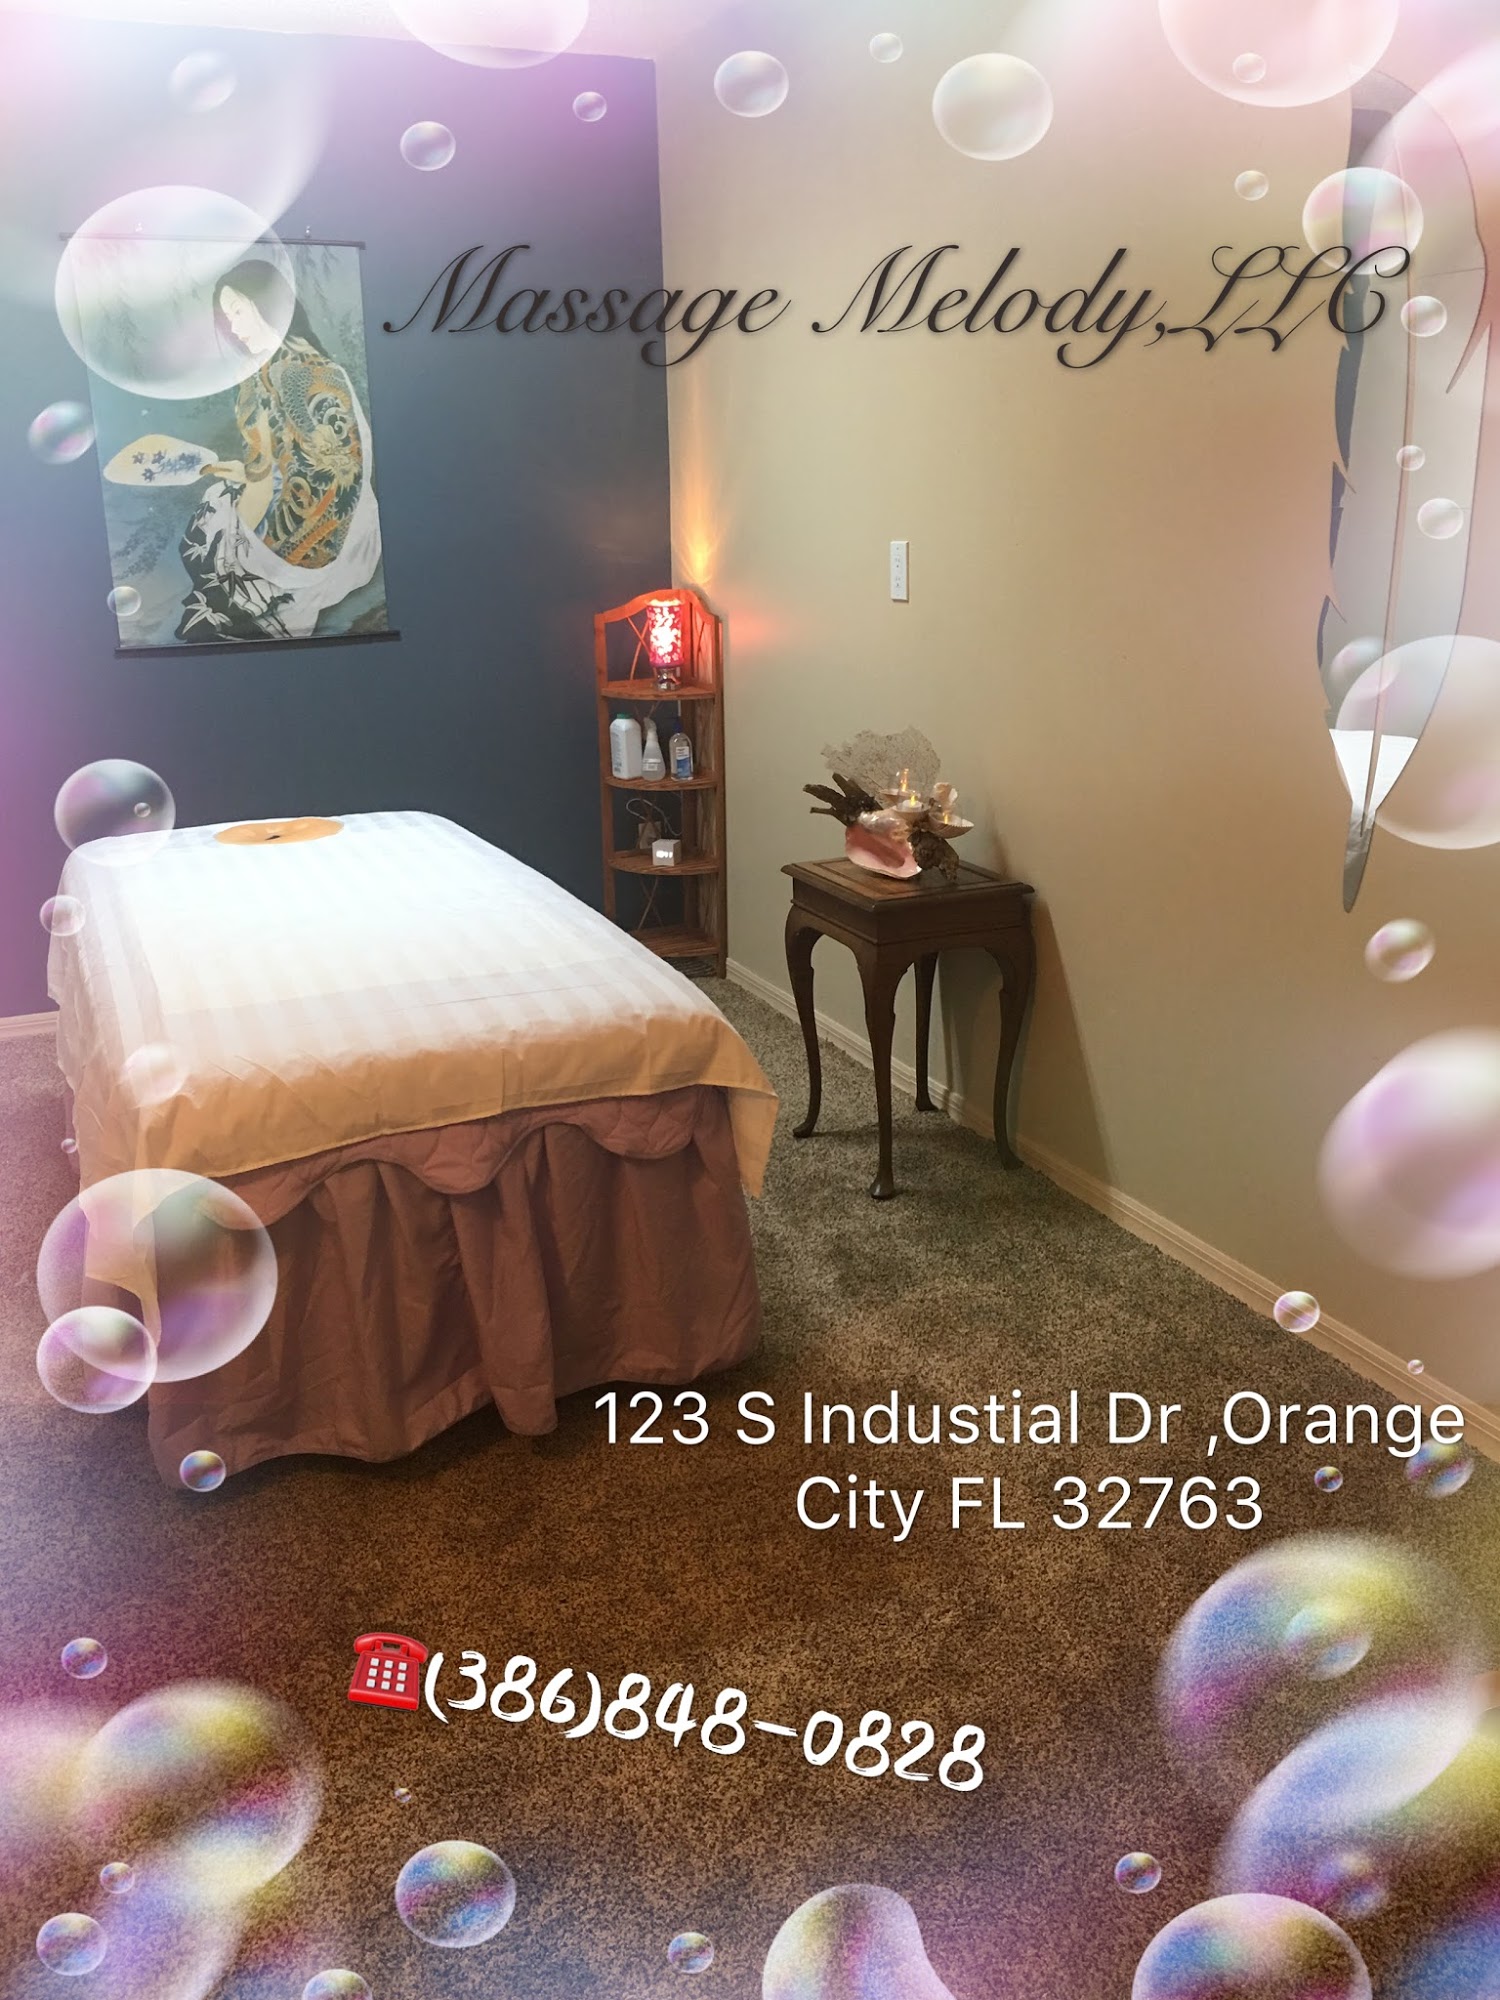 Massage Melody & Cupping